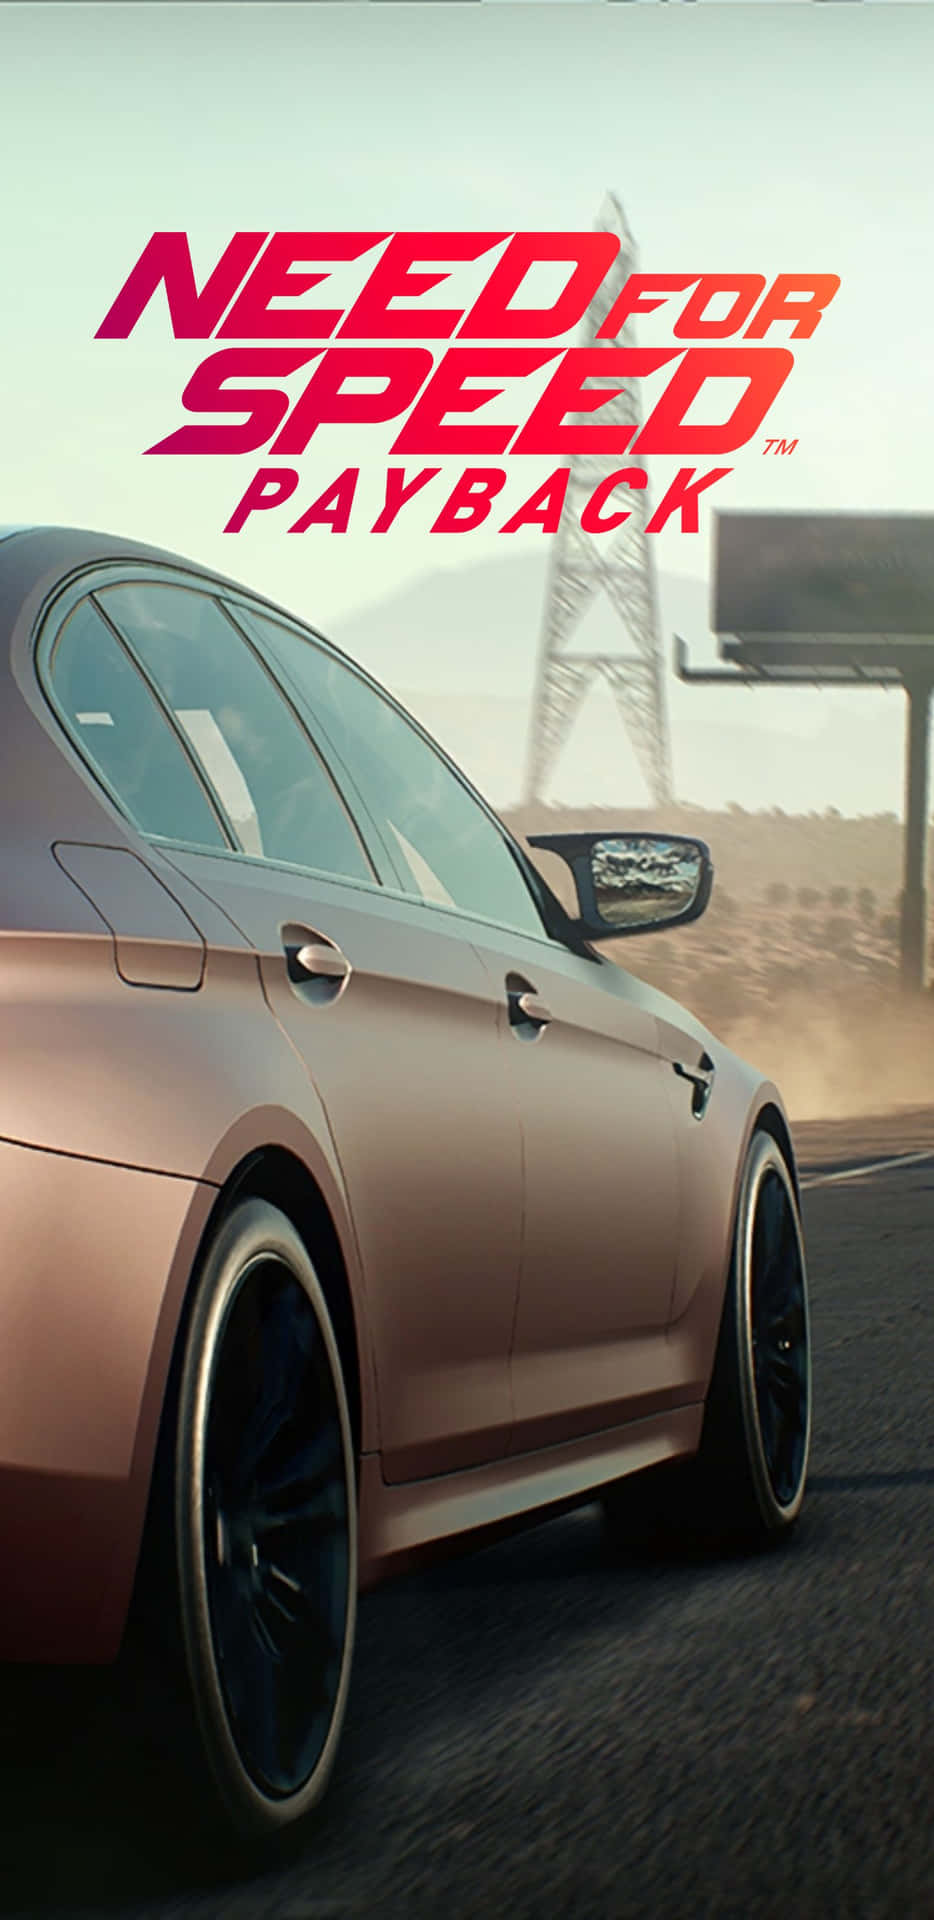 Feel the excitement of the racetrack in Need for Speed Payback on Pixel 3 XL